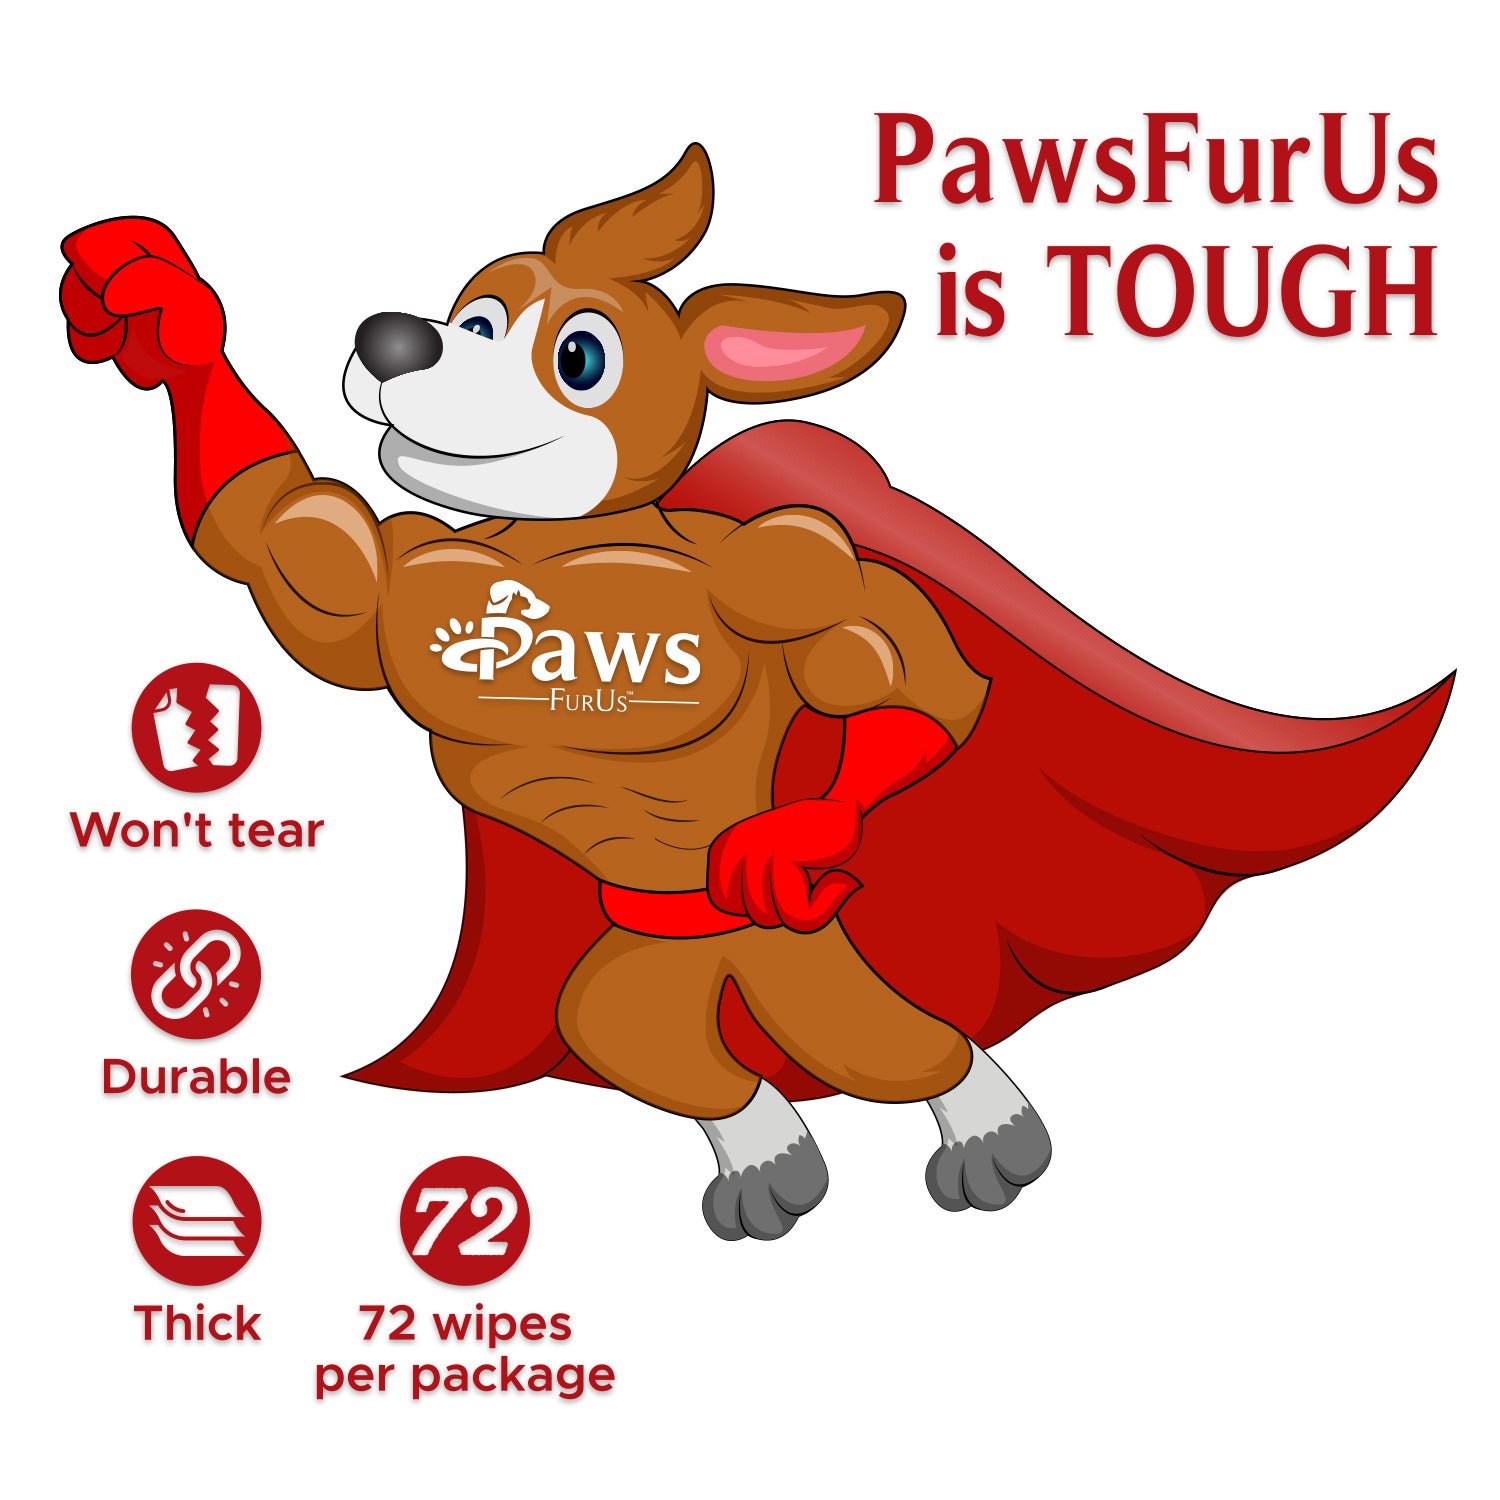 PawsFurUs is tough: won't tear, durable, thick and 72 wipes per package